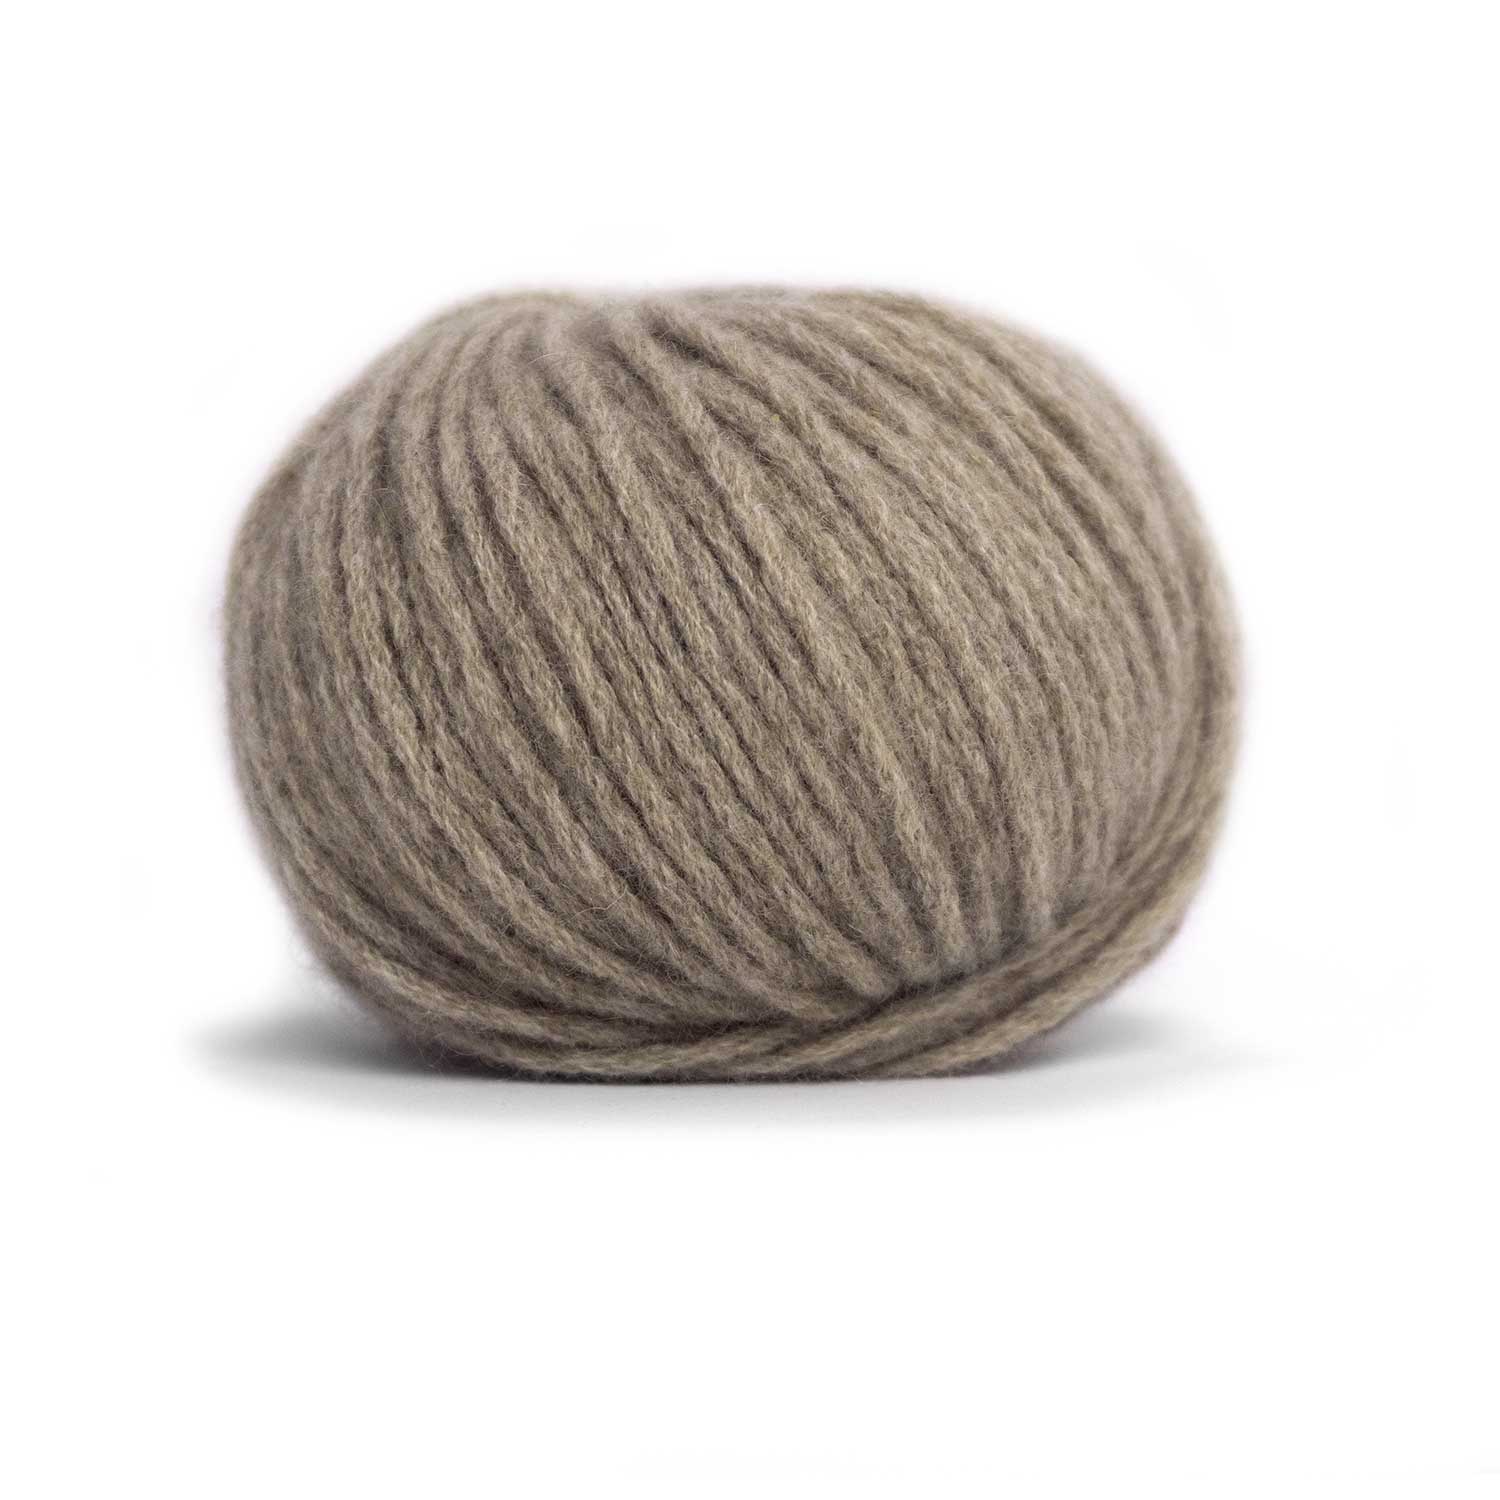 ORGANIC CASHMERE WORSTED, 100% Cashmere Wool, Knitting, Crocheting